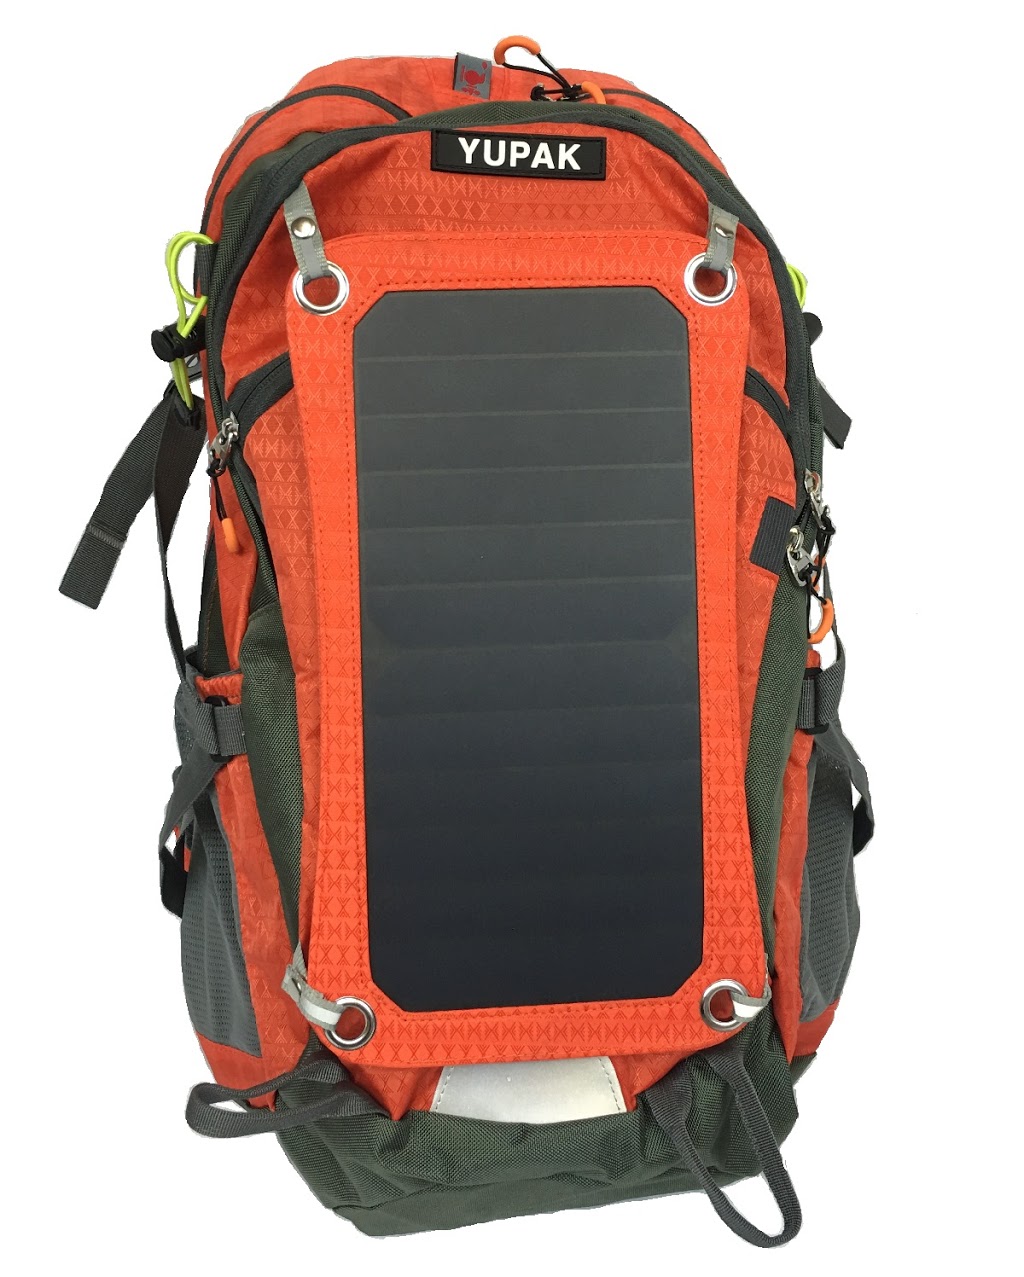 B2CBROKER.COM - Kick Scooter - Solar Panel Backpack | 690 Progress Ave #7, Scarborough, ON M1H 3A6, Canada | Phone: (647) 342-2022